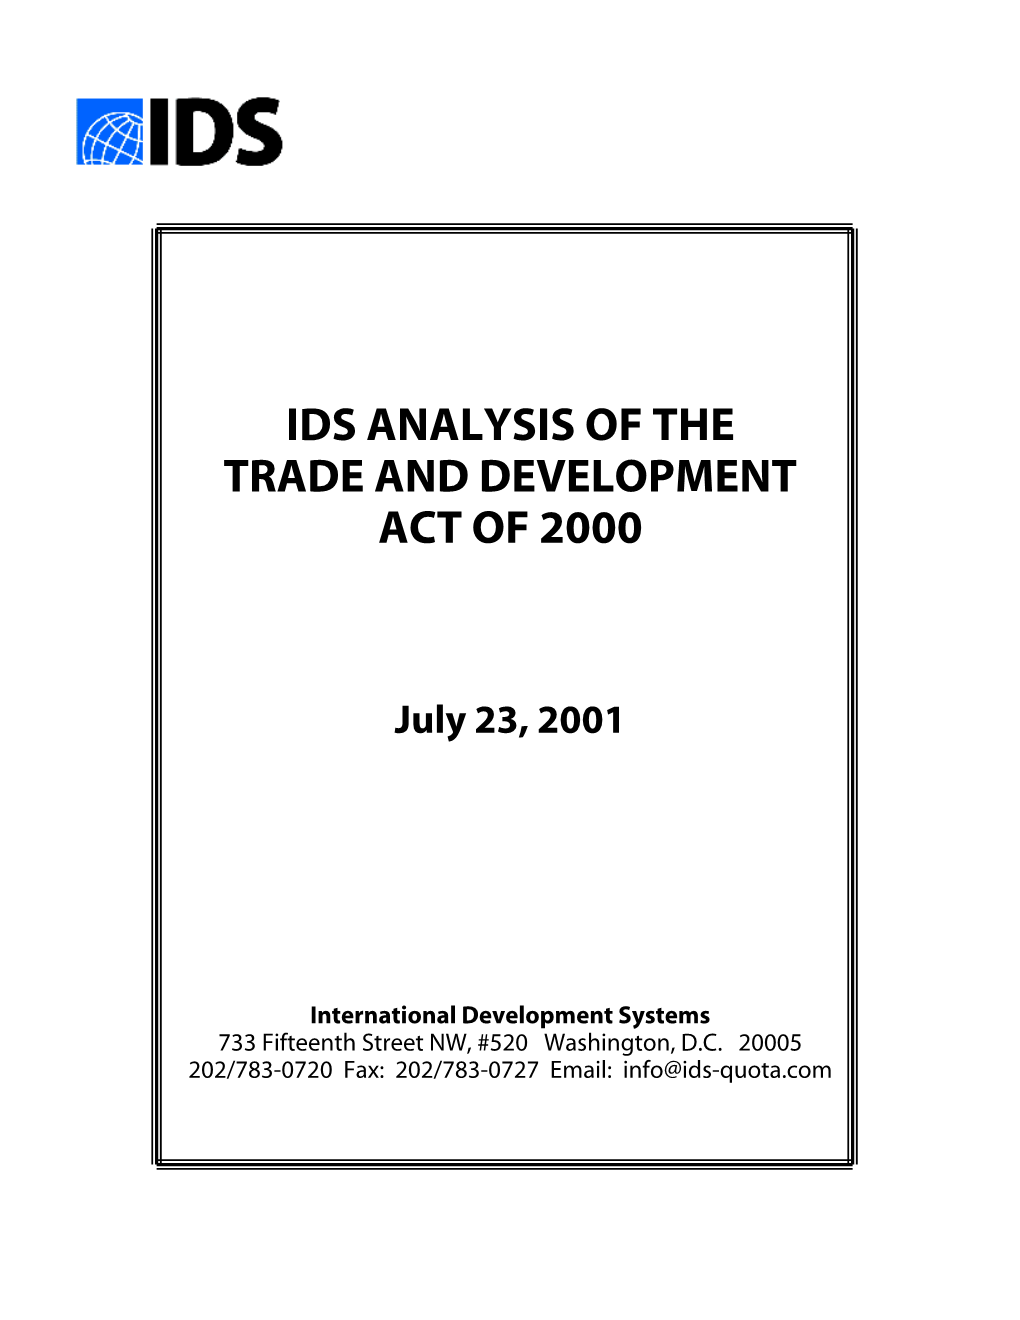 Ids Analysis of the Trade and Development Act of 2000